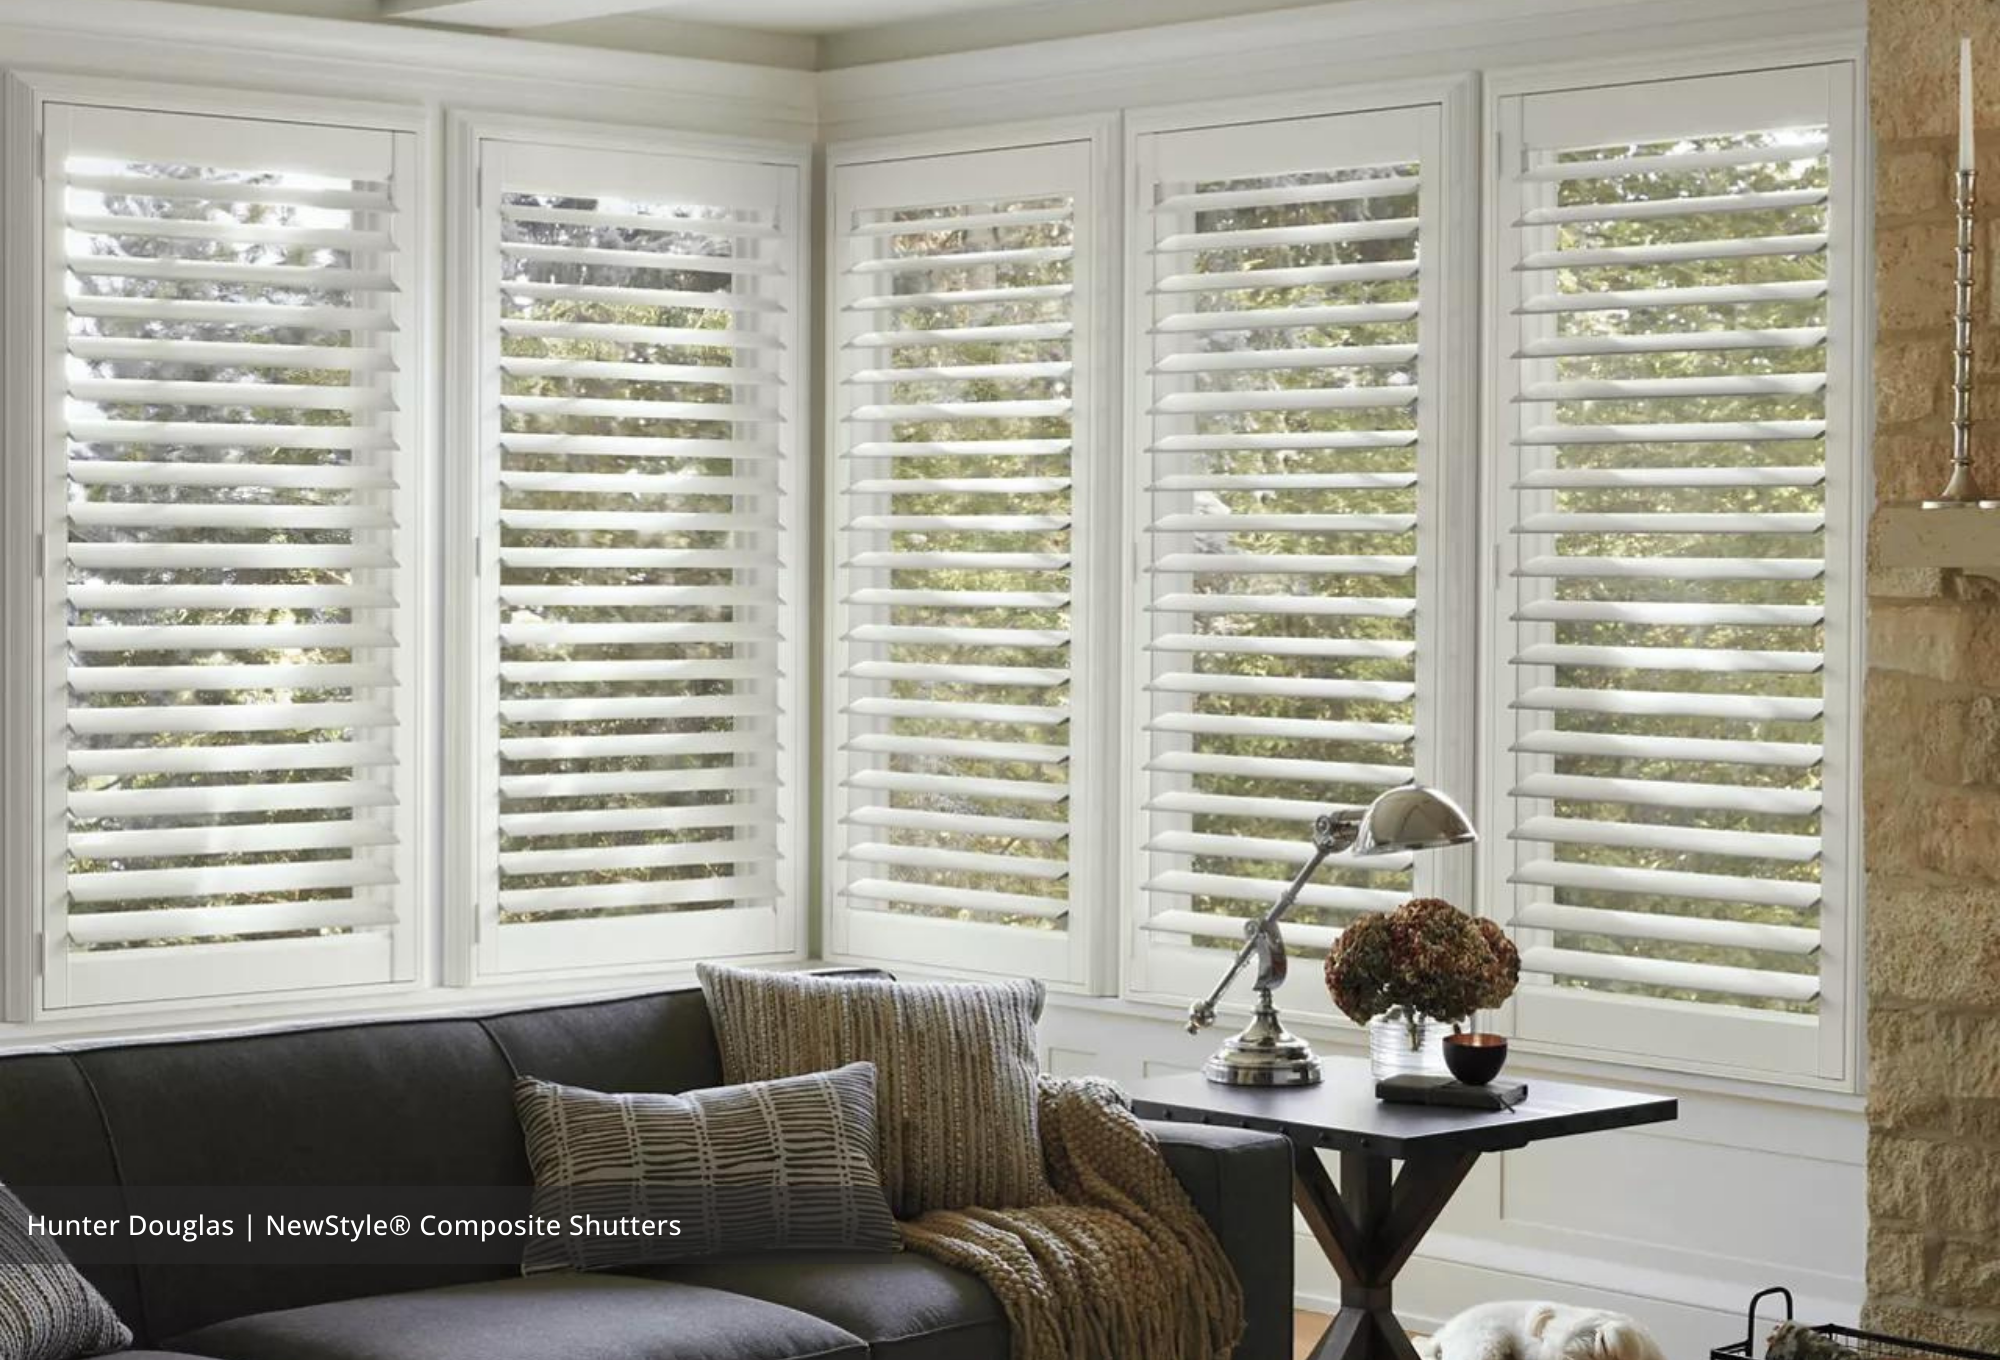 Hunter Douglas Shutters available at JC Licht.